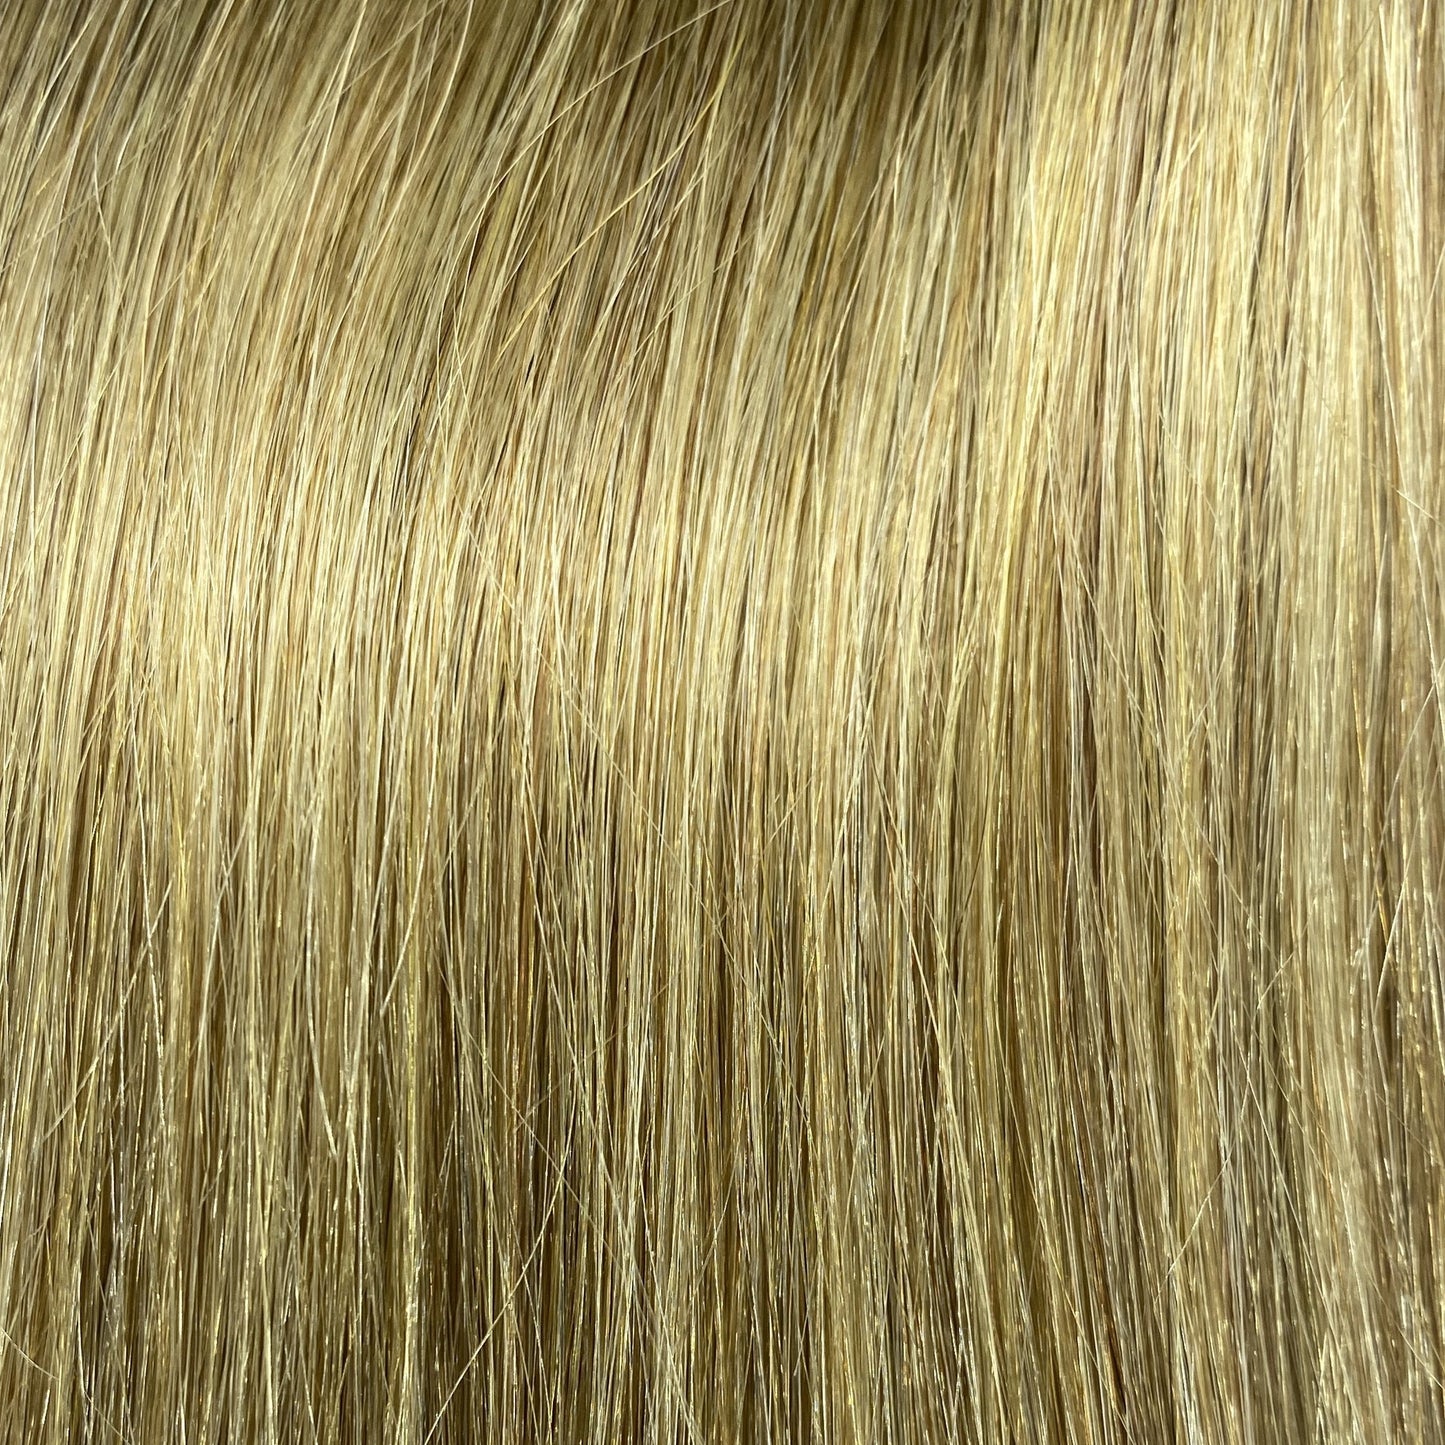 Velo #4&10 - 20 inches - Light Chestnut into Dark Blonde Ombre Velo DR Hair Products Co 